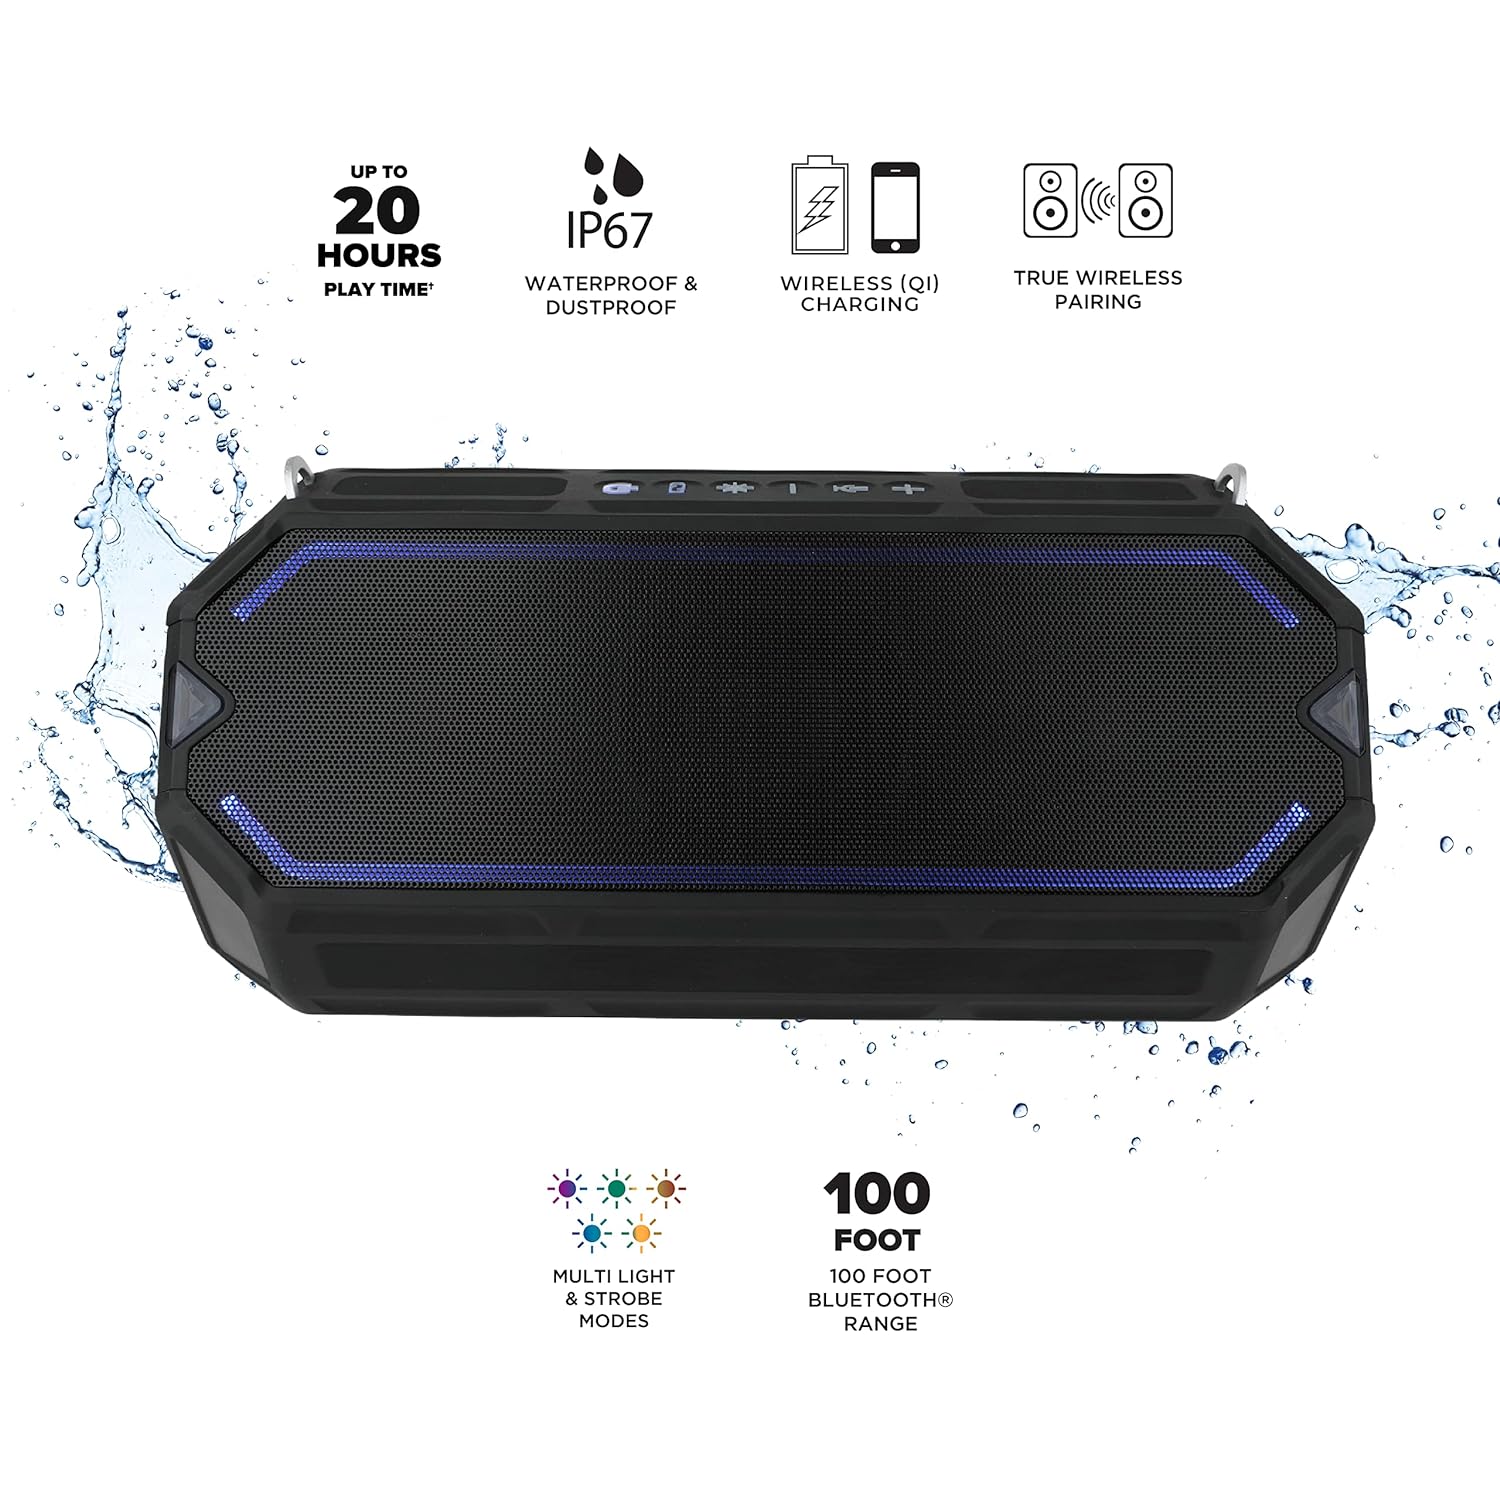 Altec Lansing HydraShock Bluetooth Speaker USB Type-C Rechargeable Portable Speaker Wireless Charger for Phone, Stereo Speaker w/LED Lights for Pool Beach Hiking Camping, 20 Hour Playtime (Black)